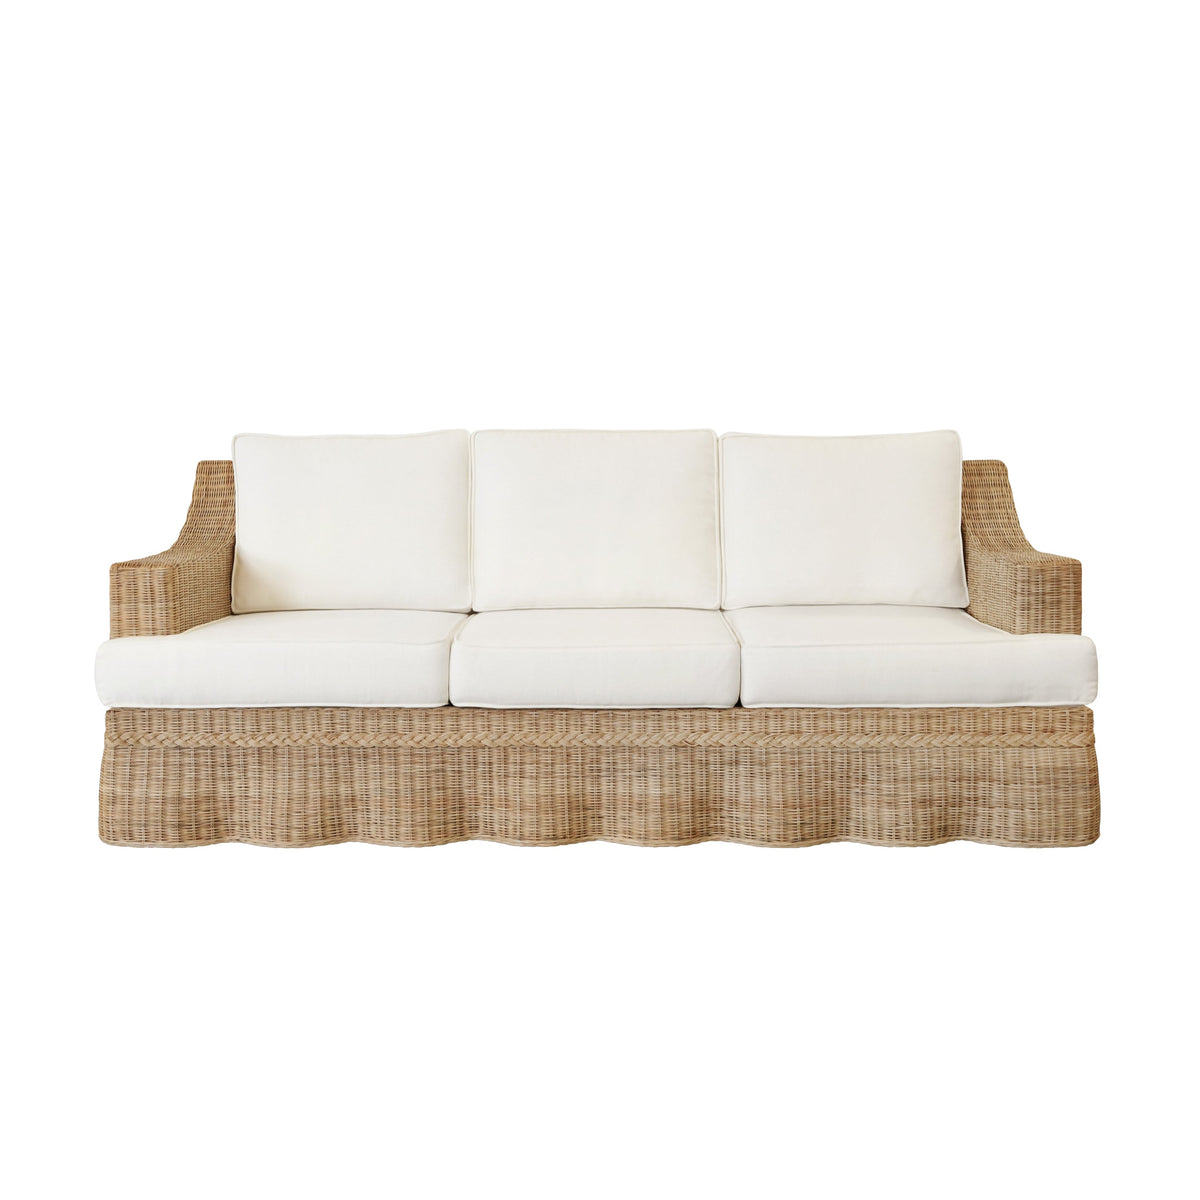 Daphne Sofa by Worlds Away - Front View with Linen and Rattan